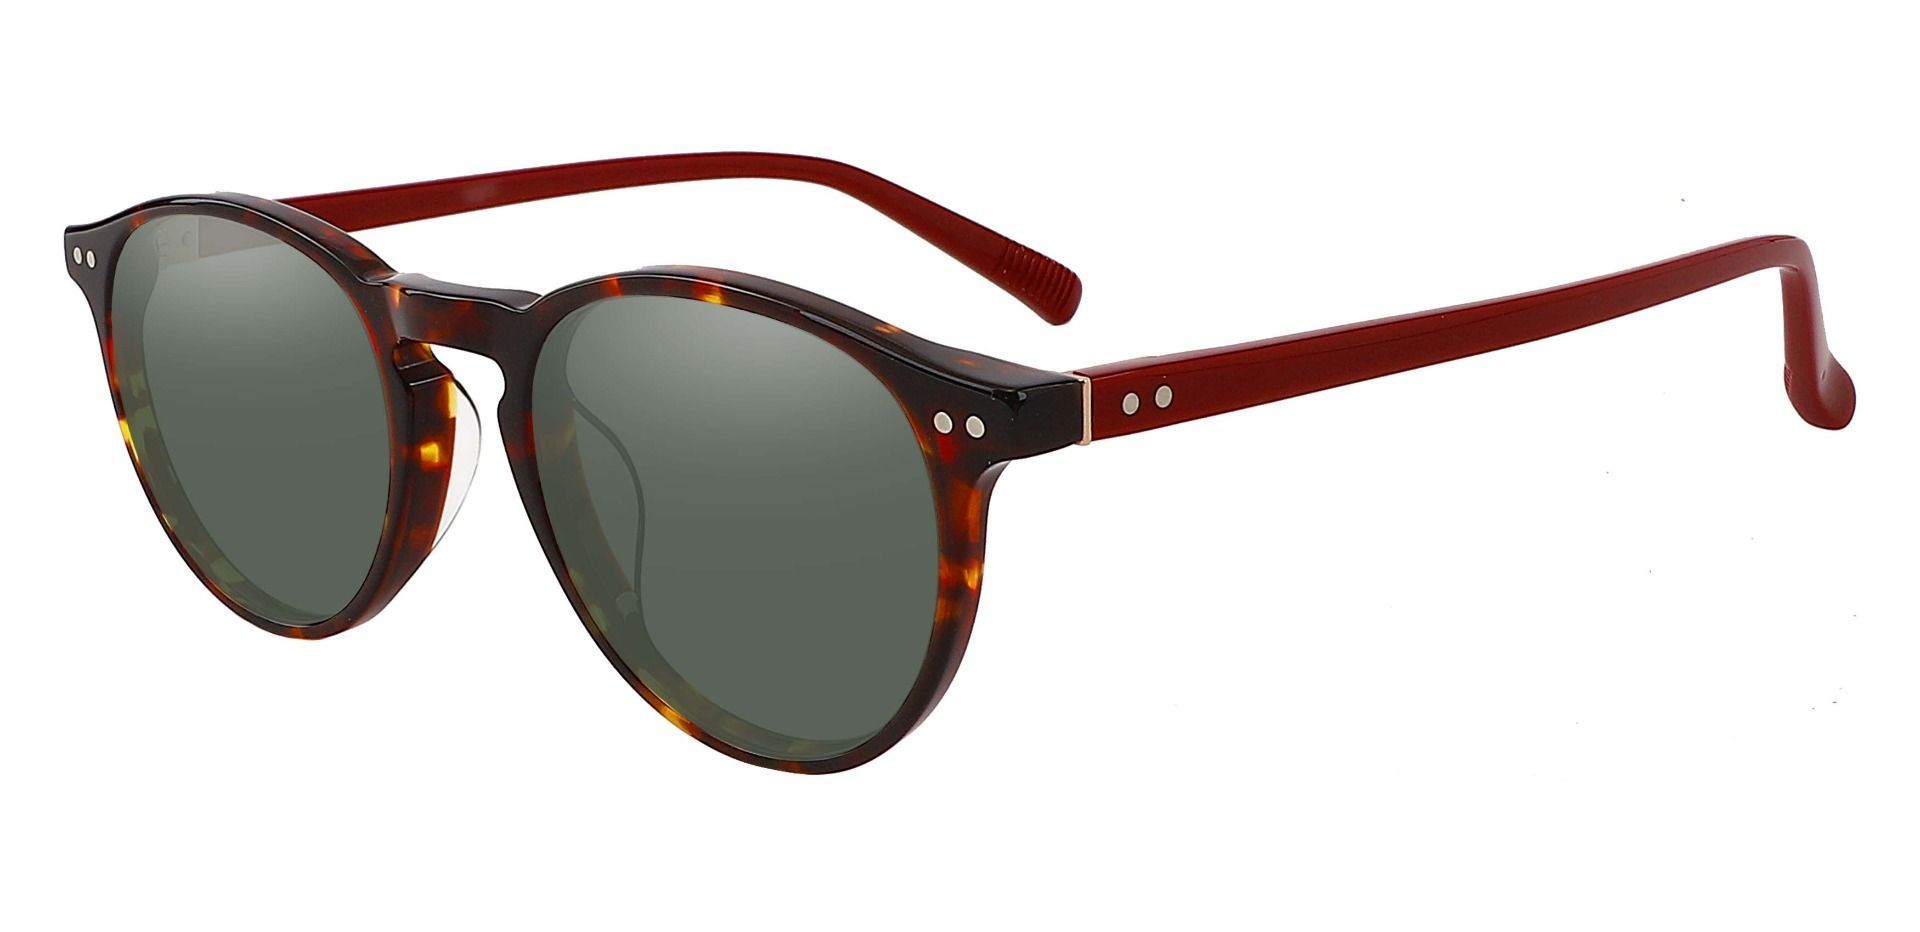 Monarch Oval Lined Bifocal Sunglasses - Tortoise Frame With Green Lenses